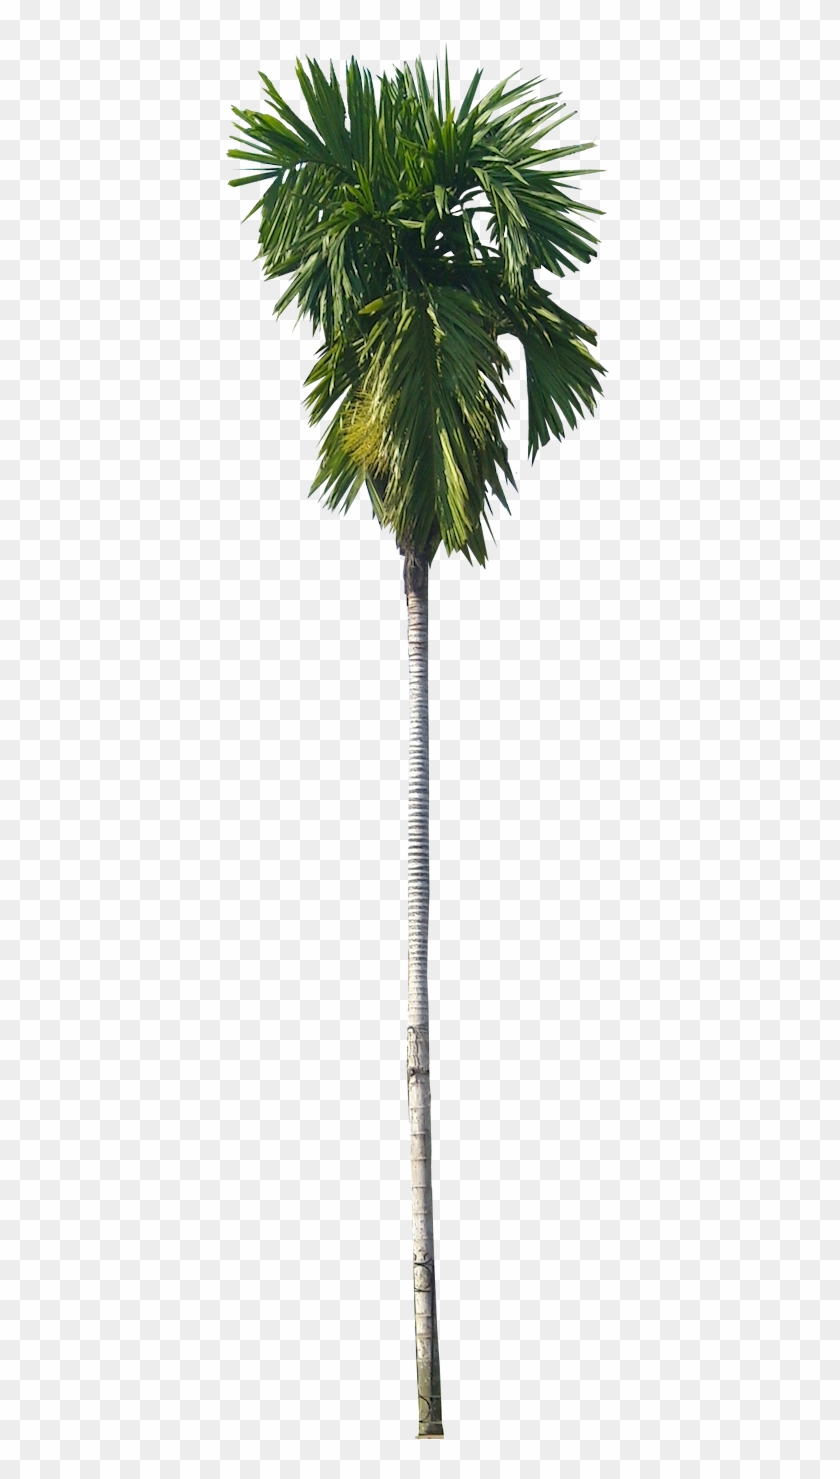 Palm Tree Png, Palm Trees, Tree Psd, Tree Graphic, - Betel Nut Palm Png ...